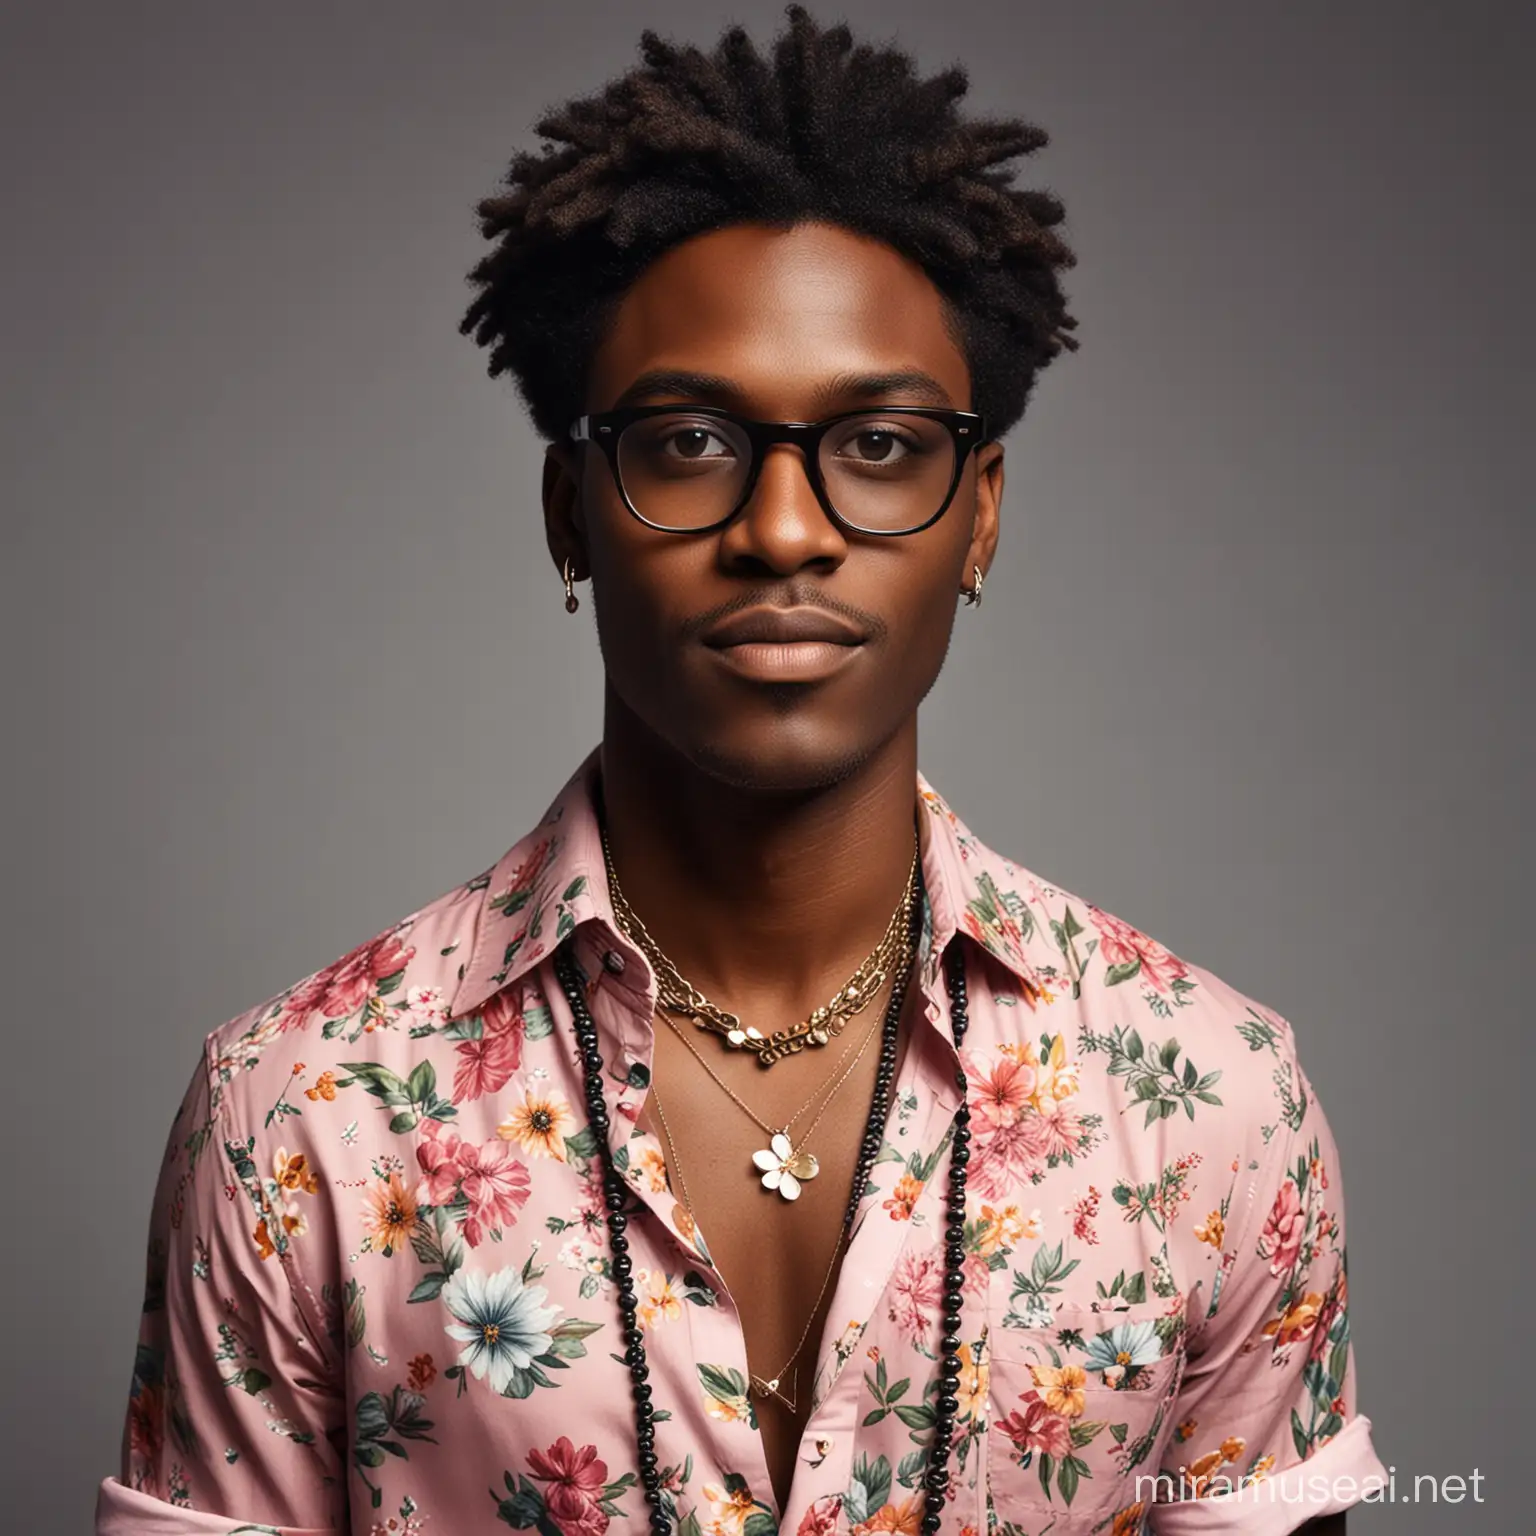 Dark skinned bass player wearing modern glasses, a shirt with flowers, chinos and a necklace